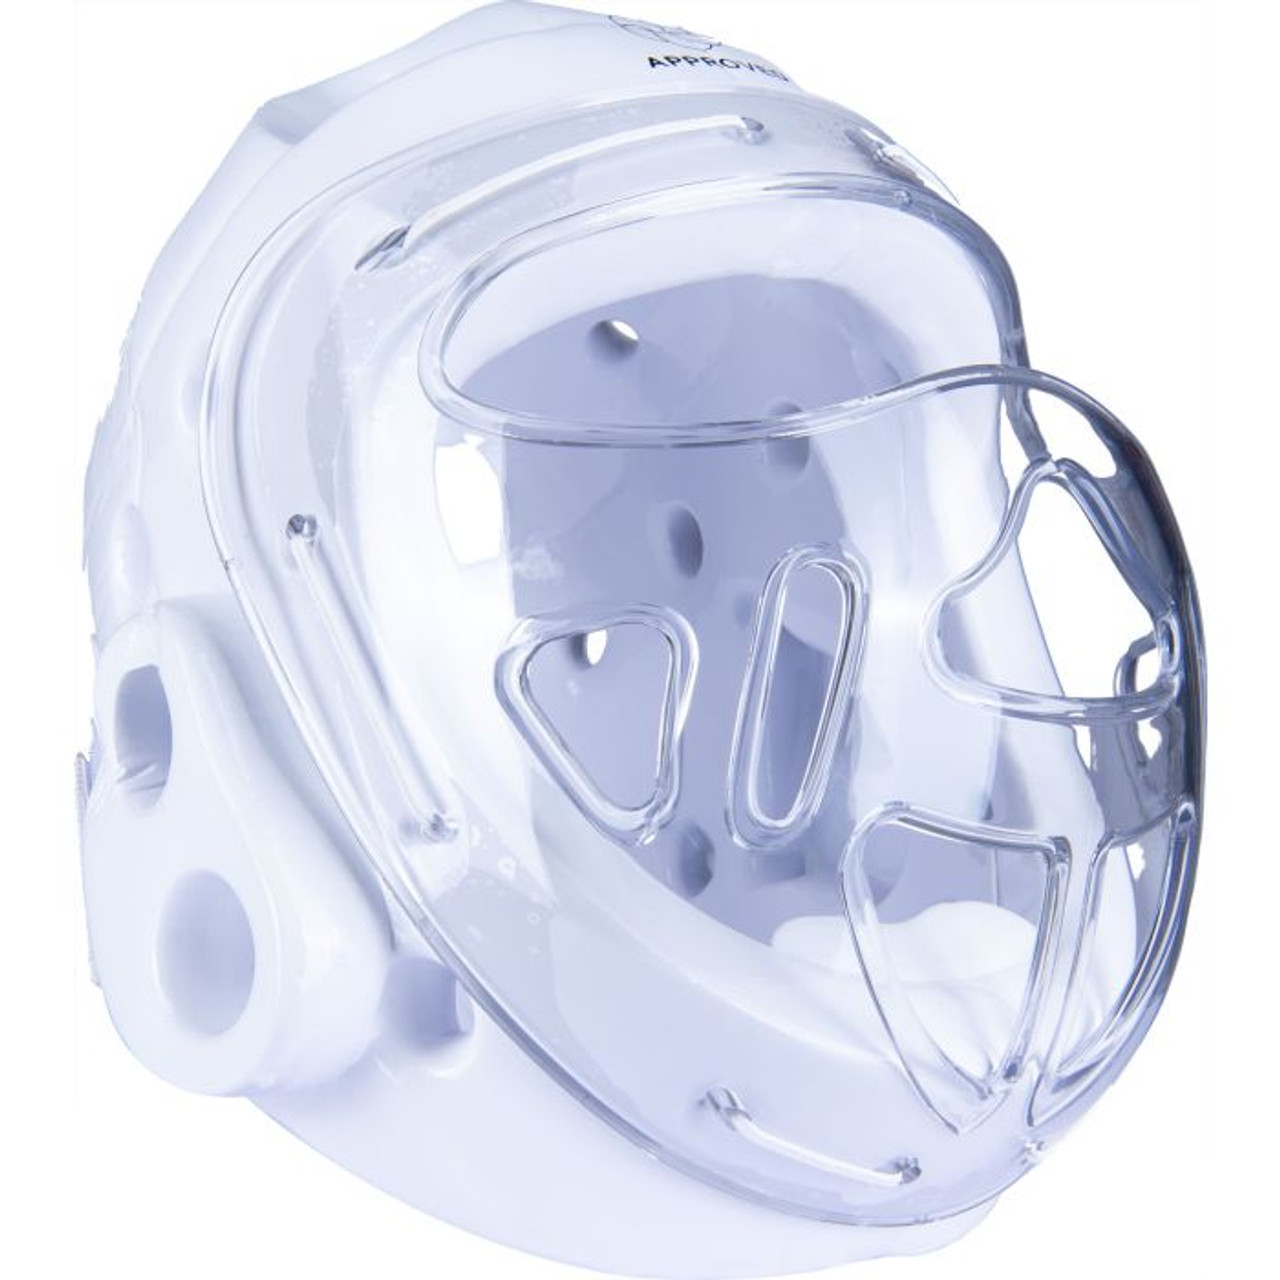 Hayashi Karate WKF Approved White Head Guard - Click Image to Close